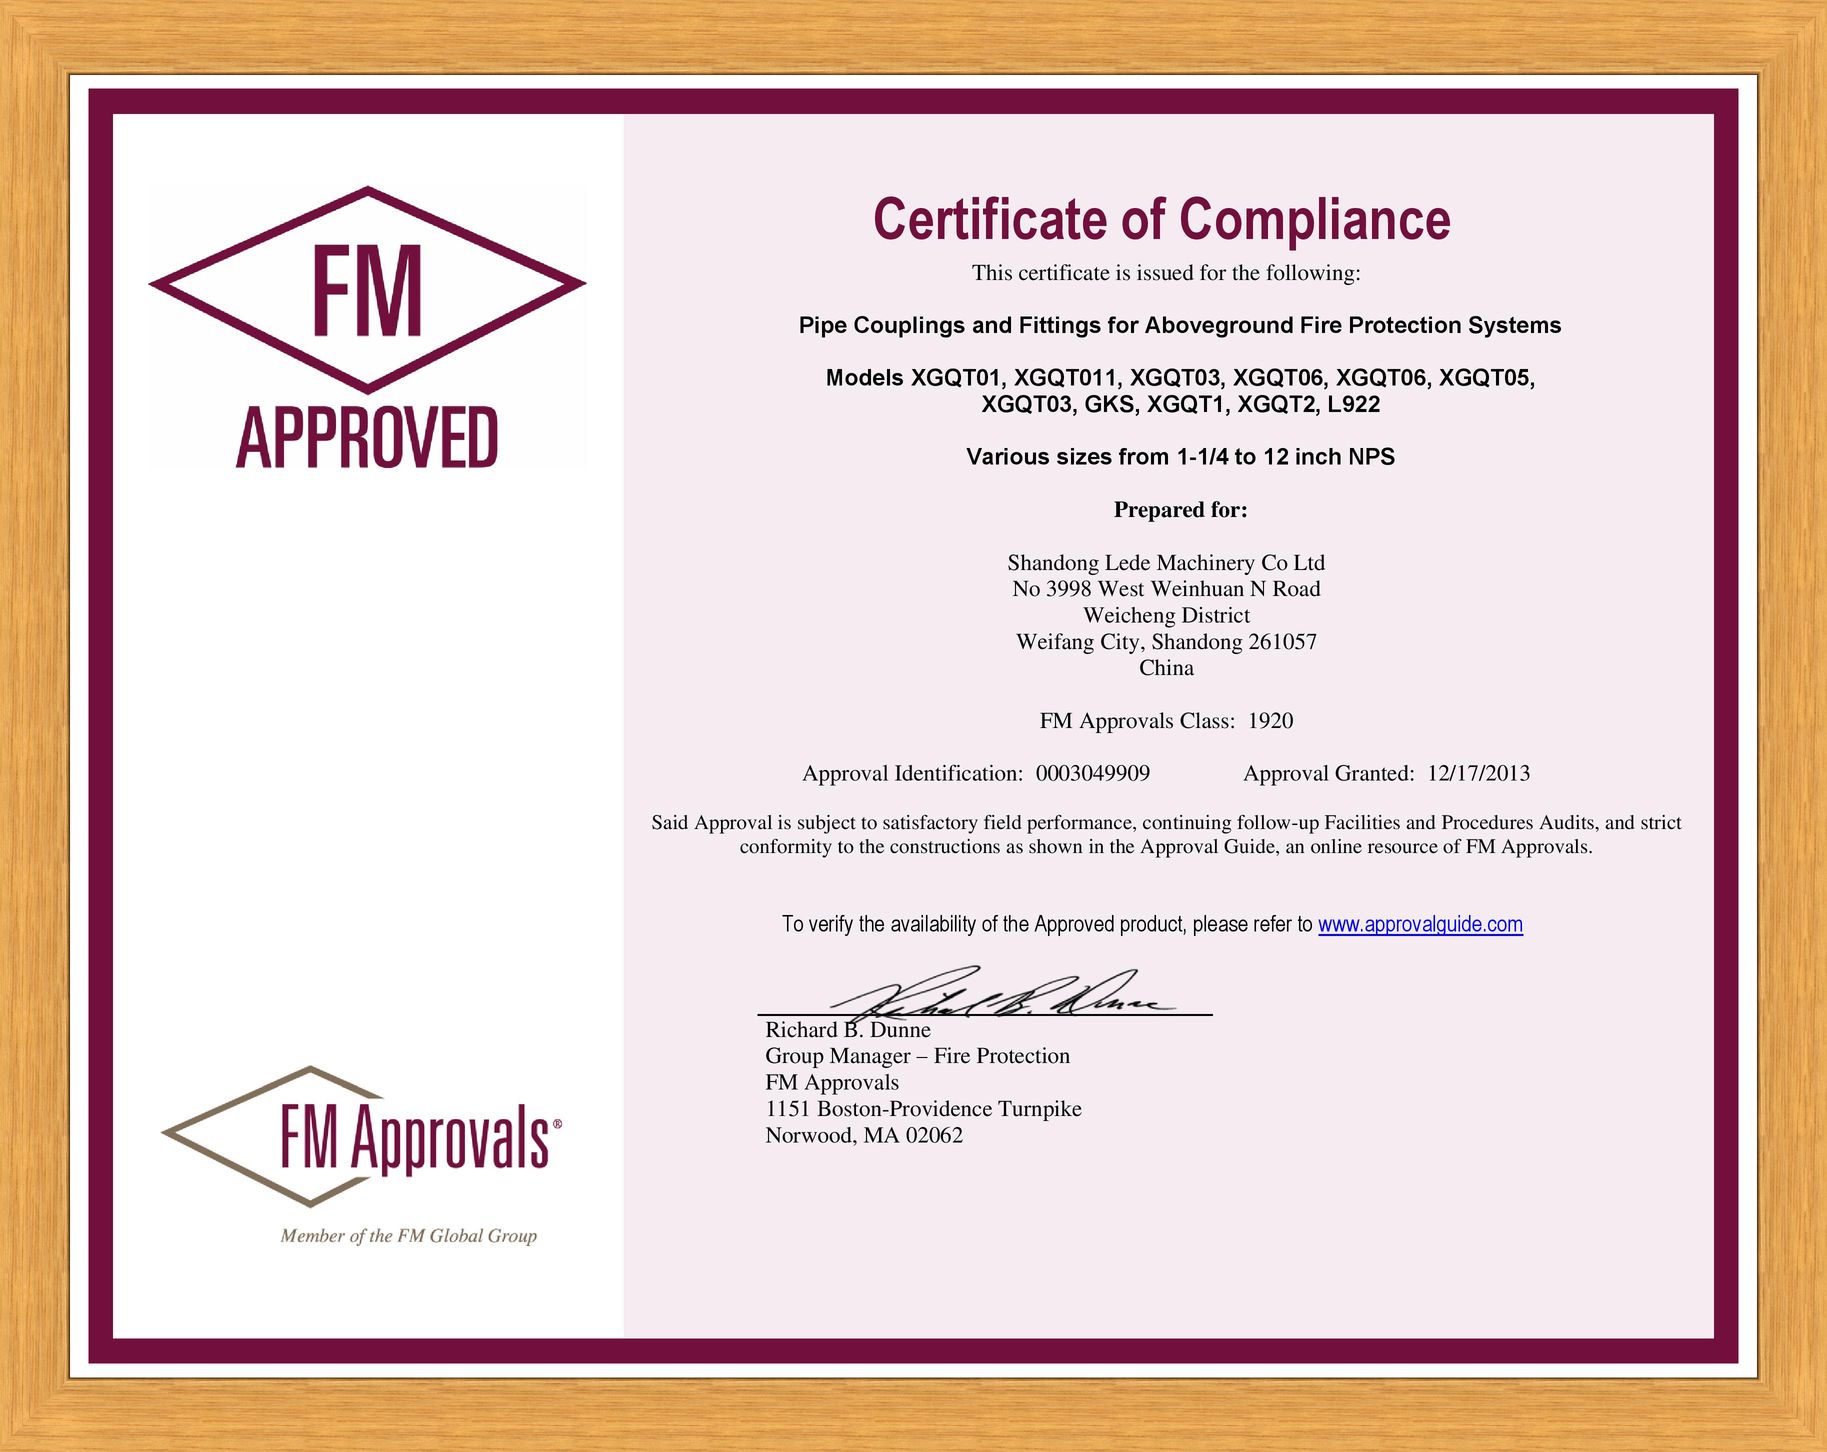 FM Approved sertificate (Pipe Couplings and Fittings), 2013